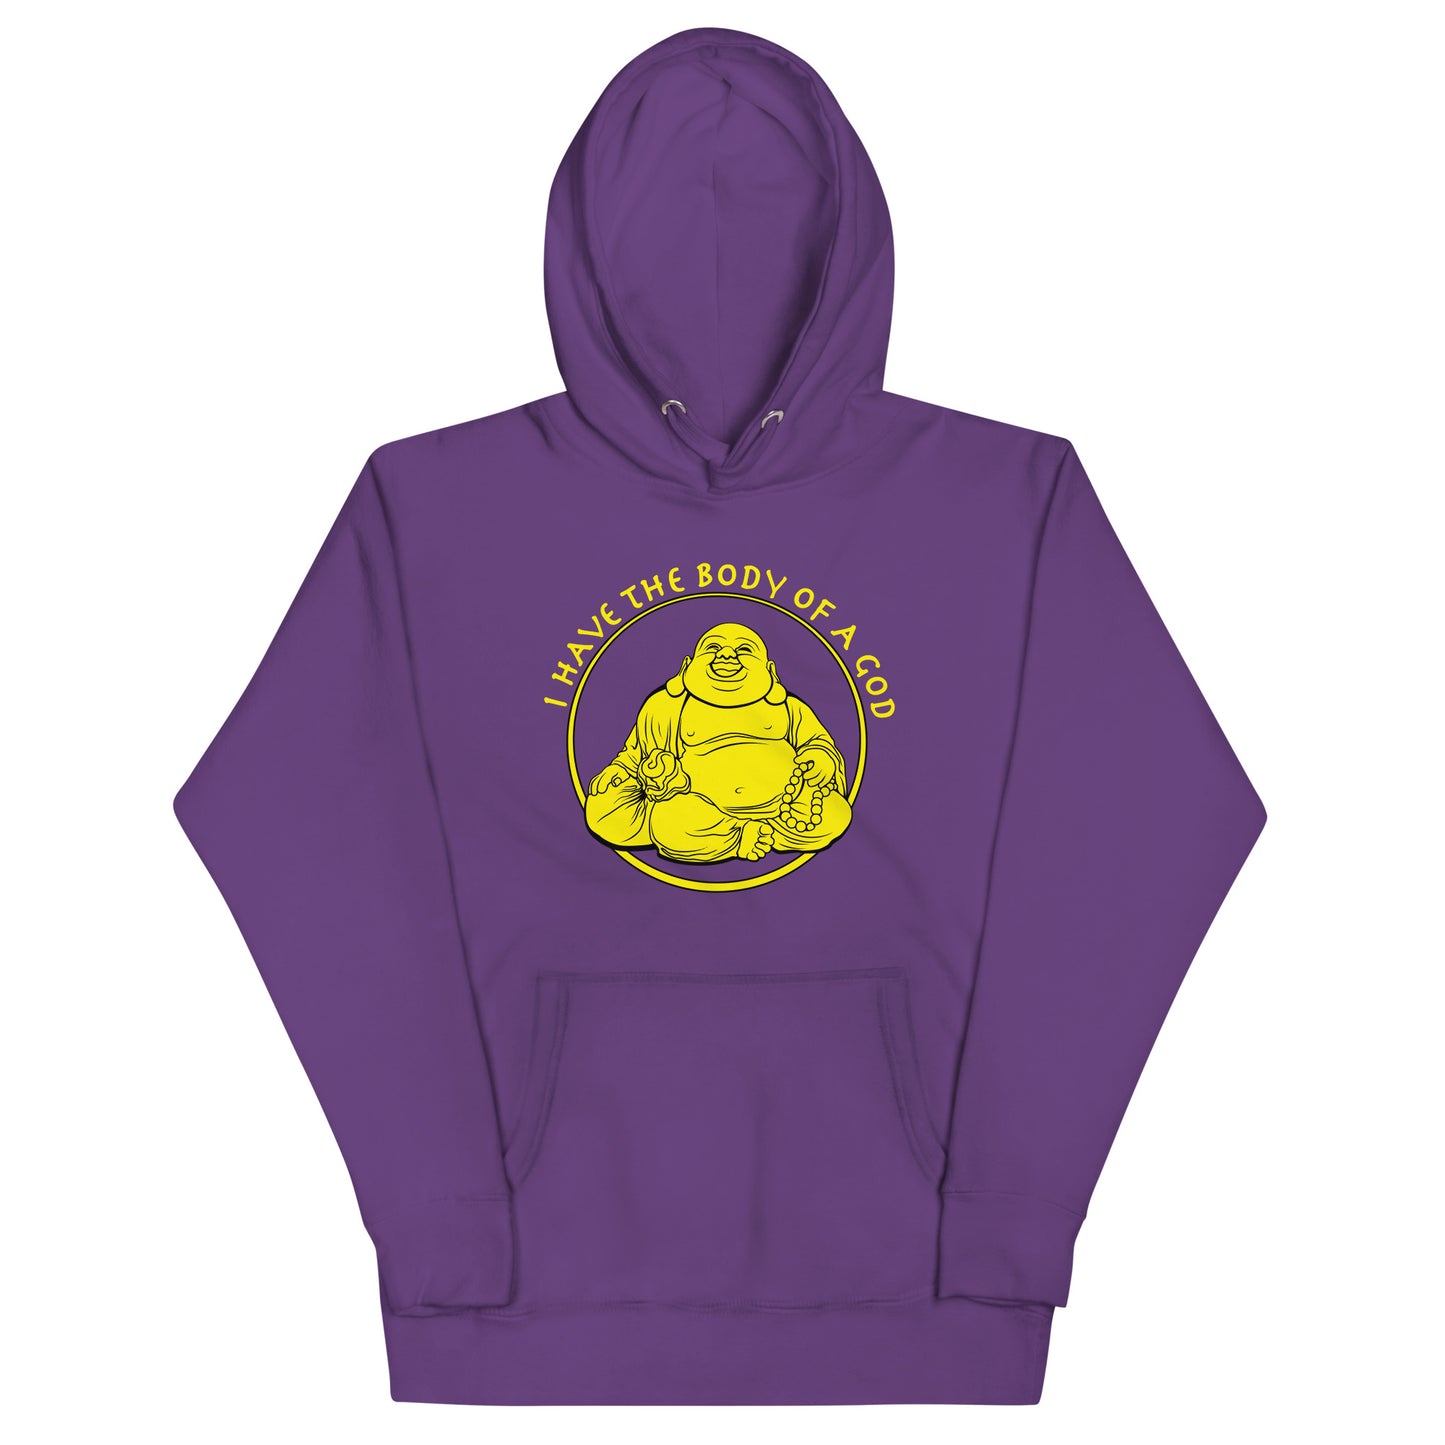 I Have the Body of a God Unisex Hoodie